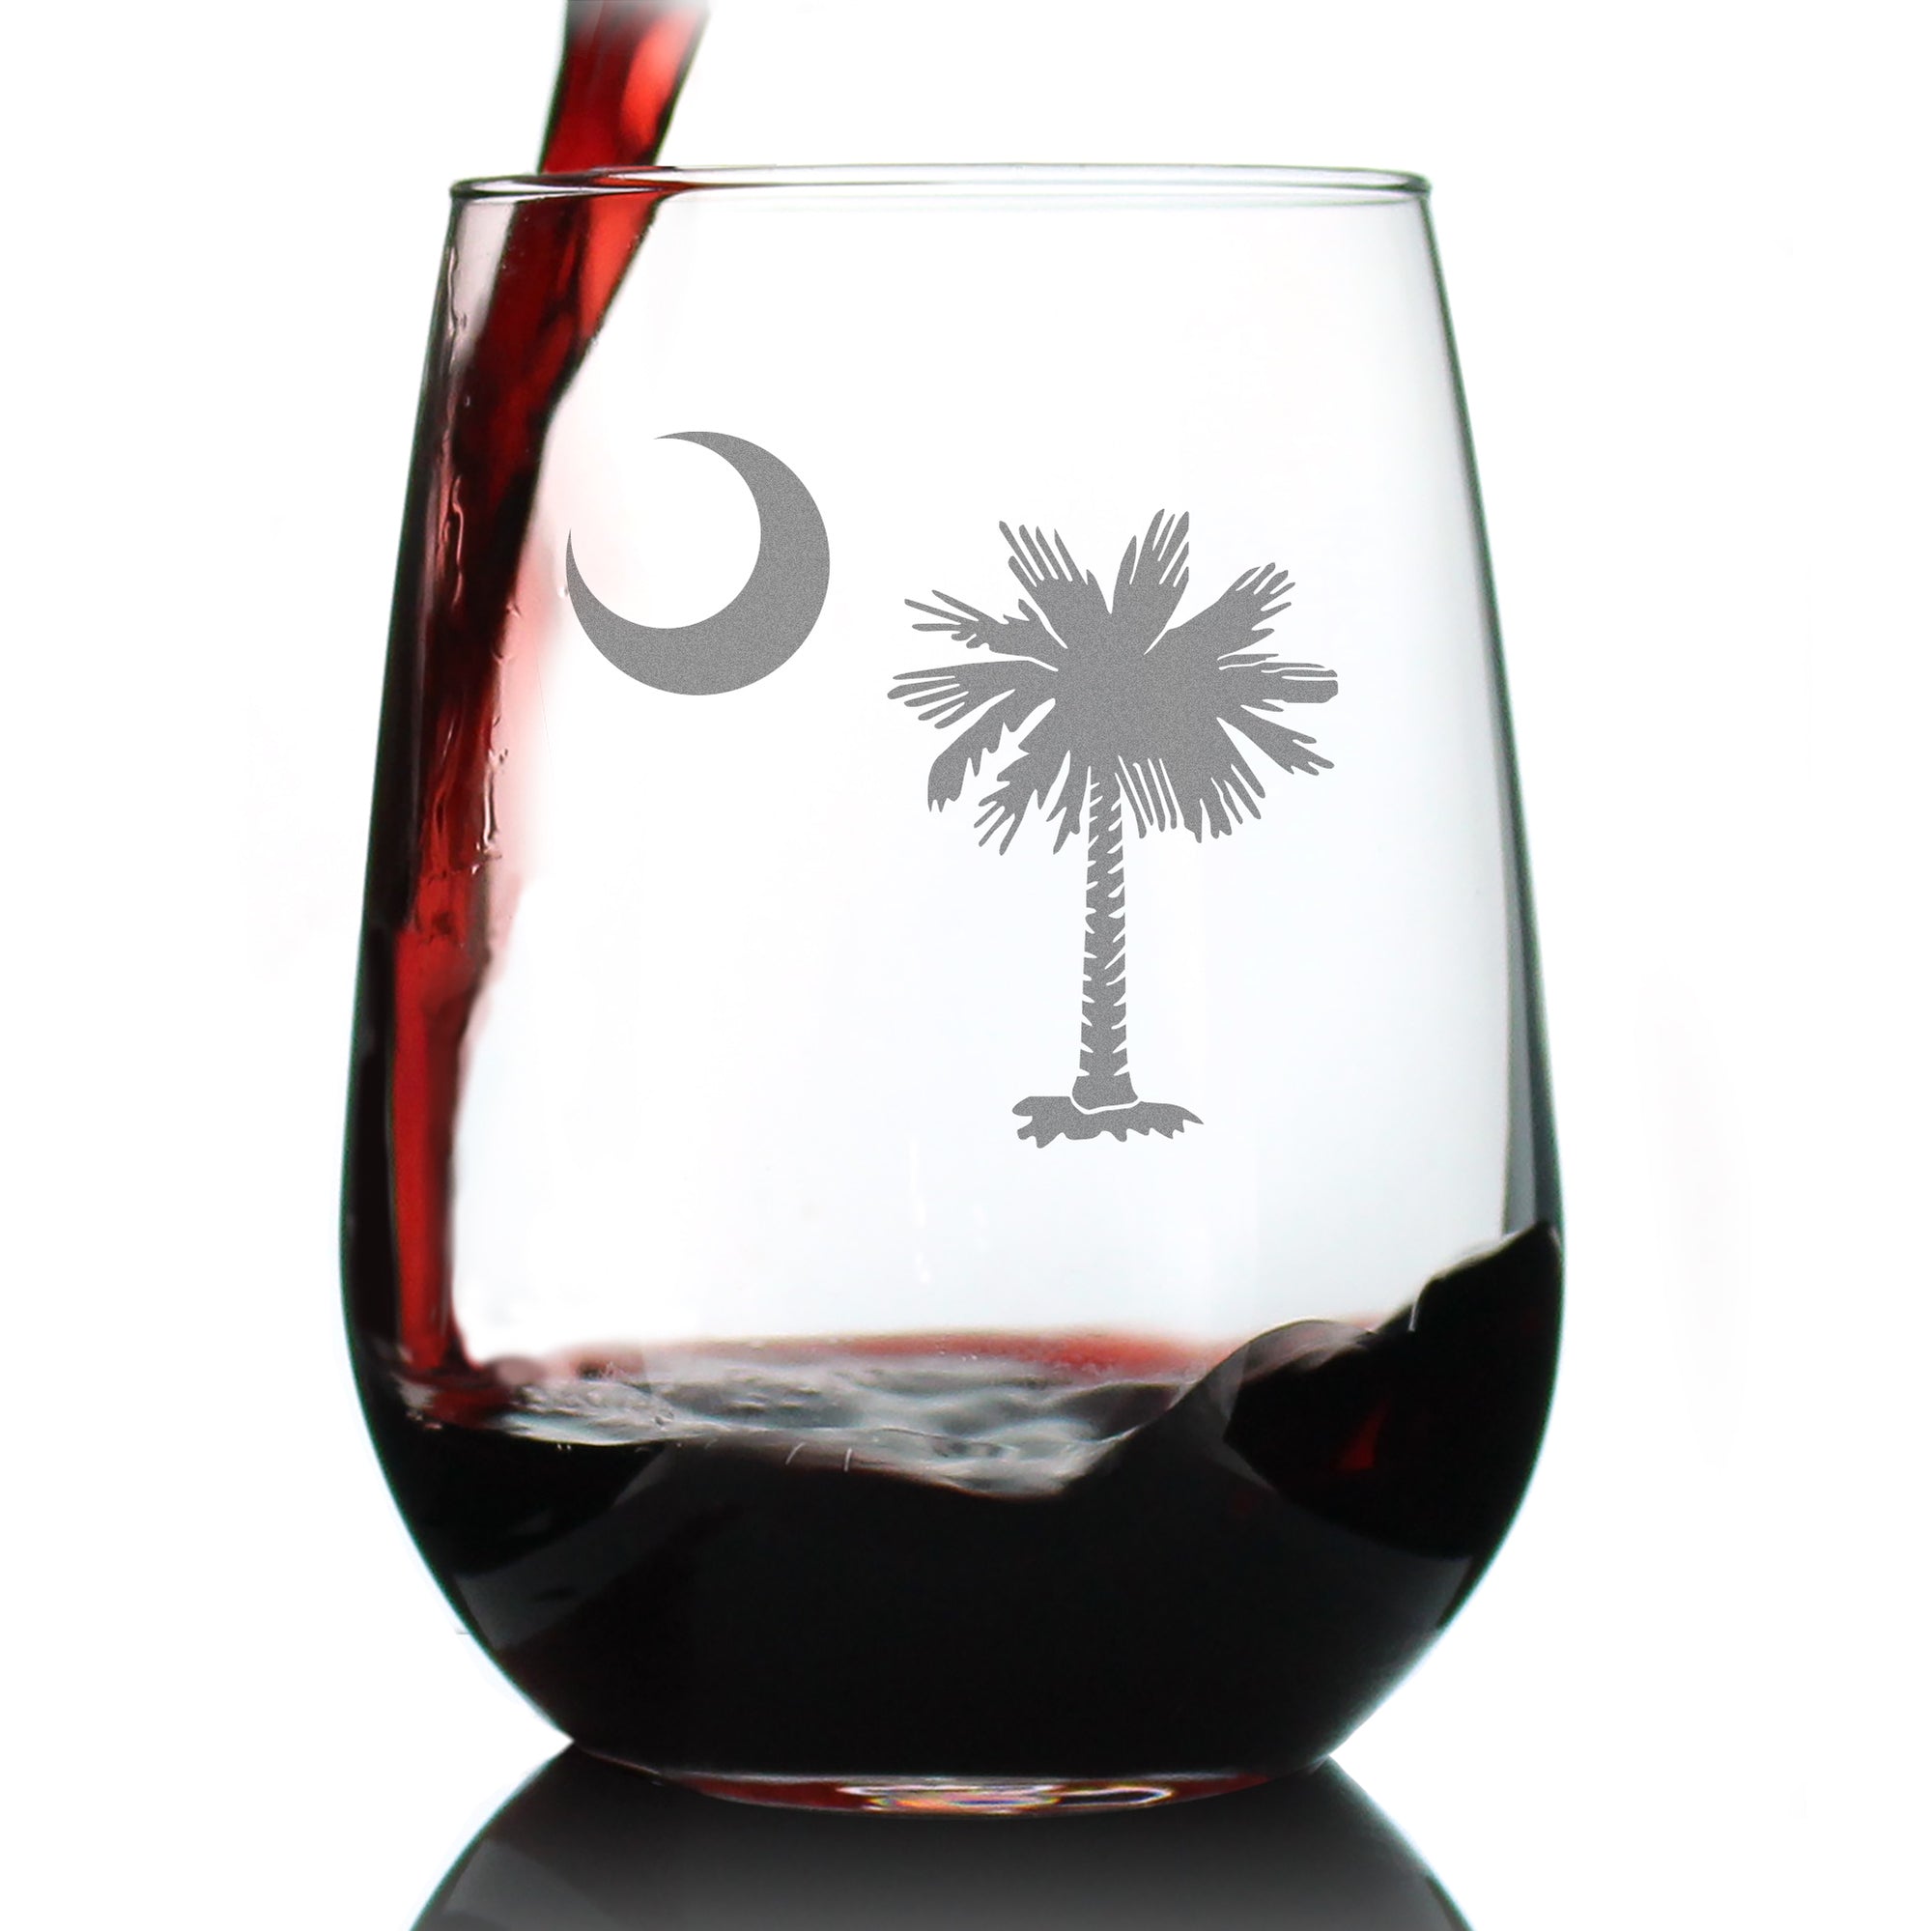 South Carolina Flag Stemless Wine Glass - State Themed Drinking Decor and Gifts for South Carolinian Women & Men - Large 17 Oz Glasses